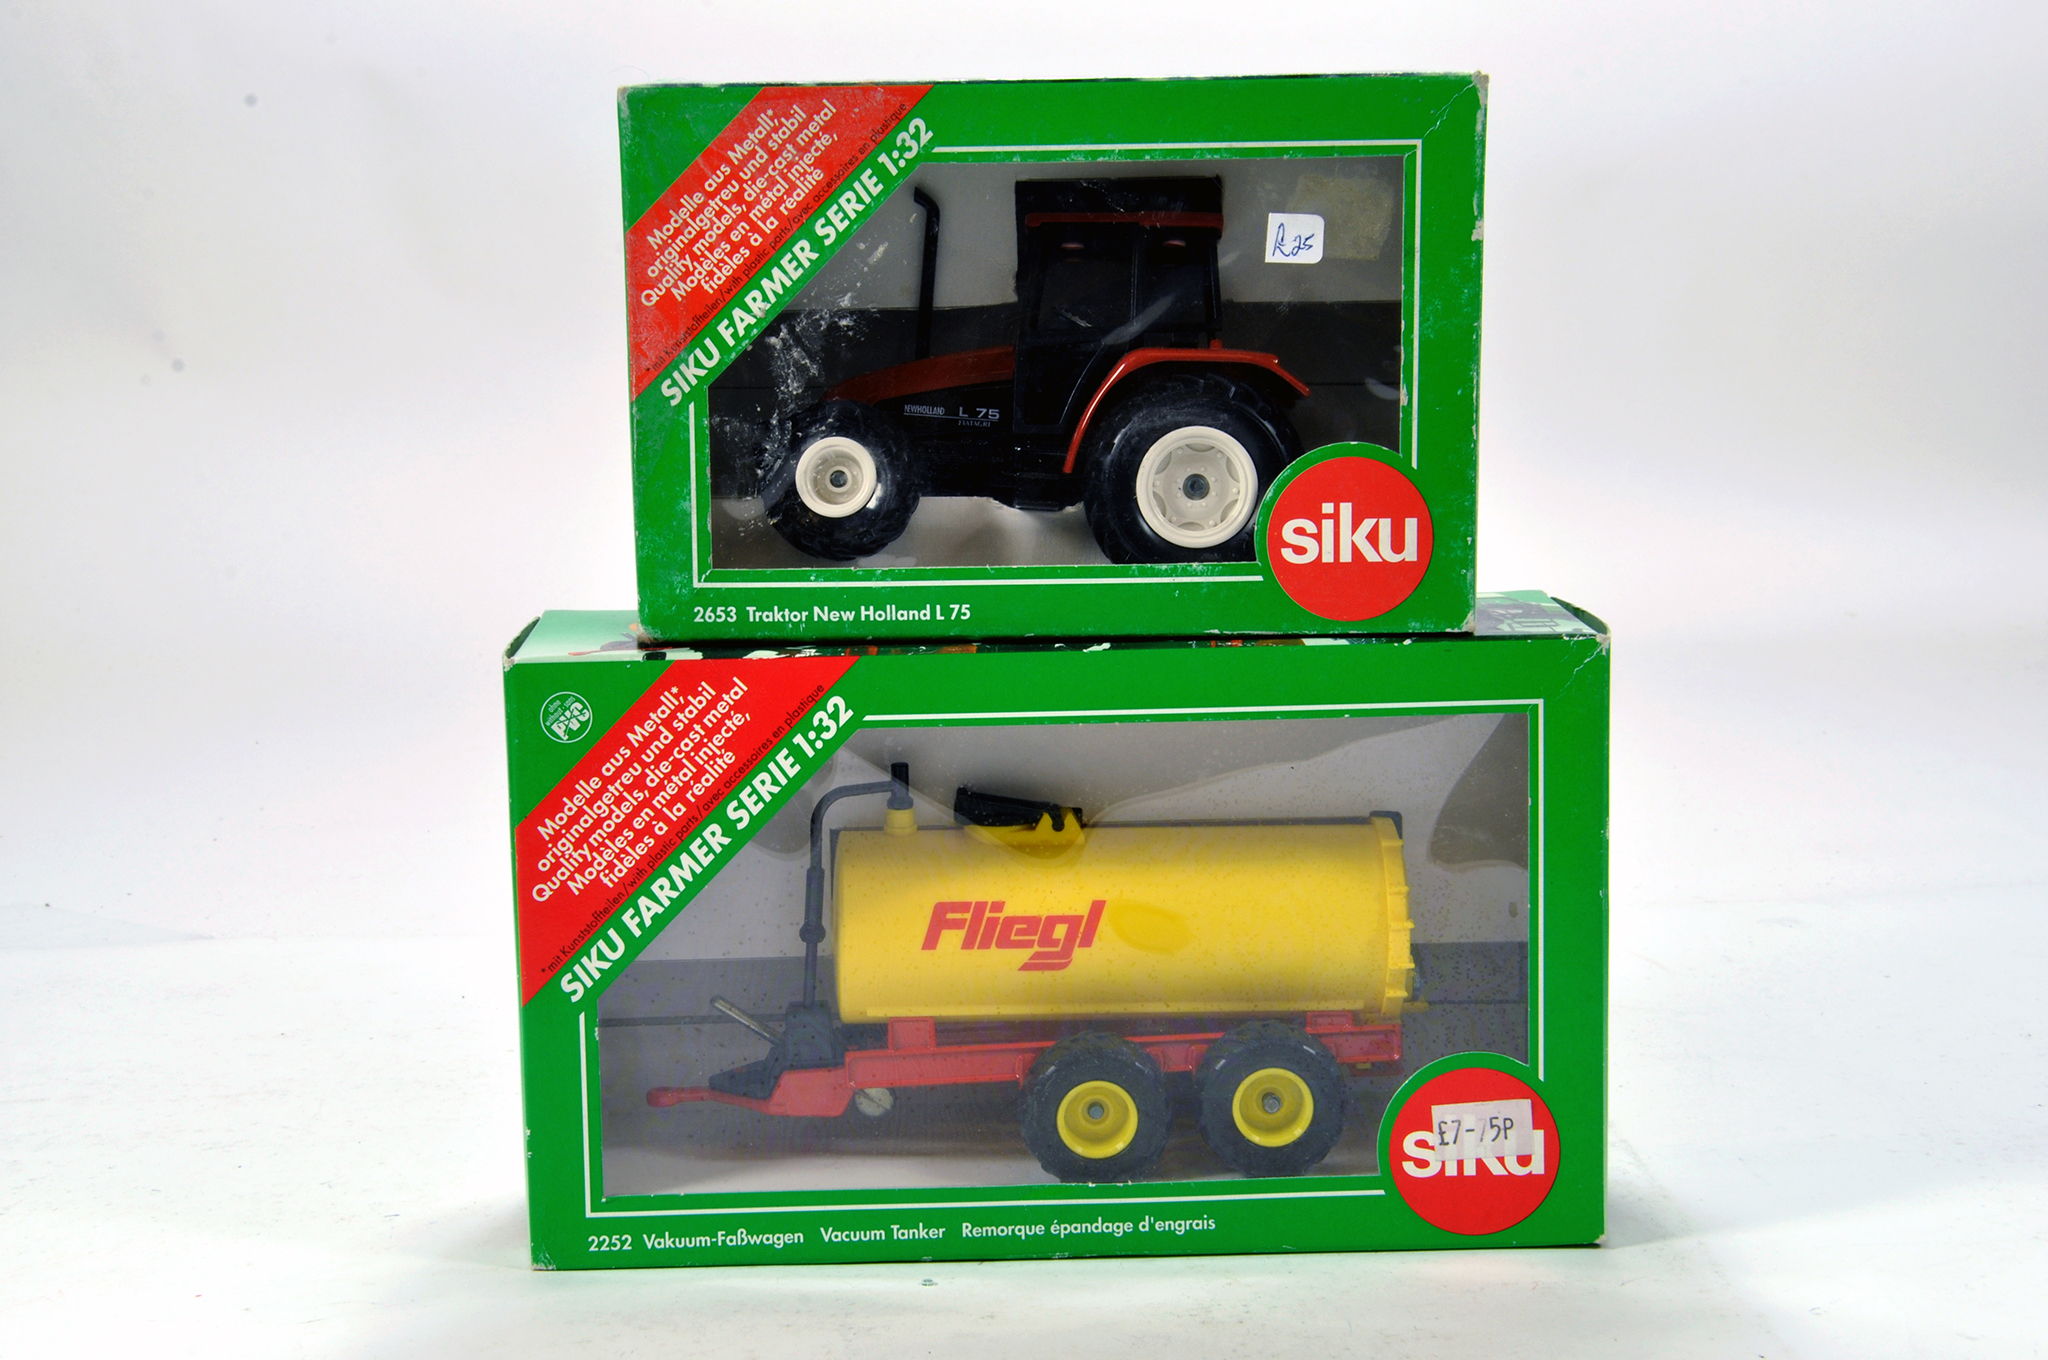 Siku 1/32 Farm issues comprising New Holland Fiat L75 Tractor and Fligel Tanker. NM in Boxes. (2)